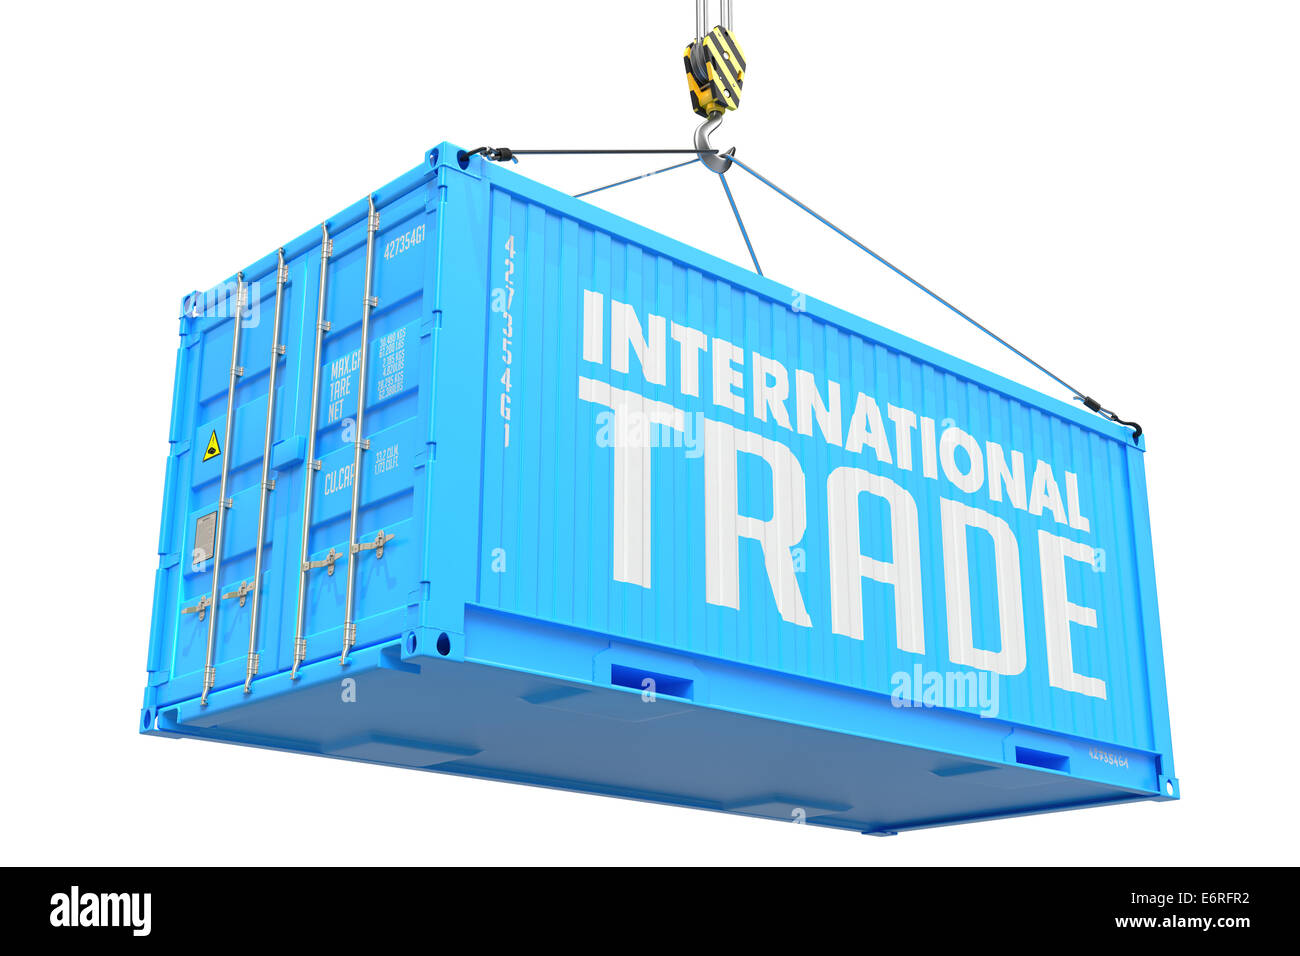 International Trade - Blue Hanging Cargo Container. Stock Photo